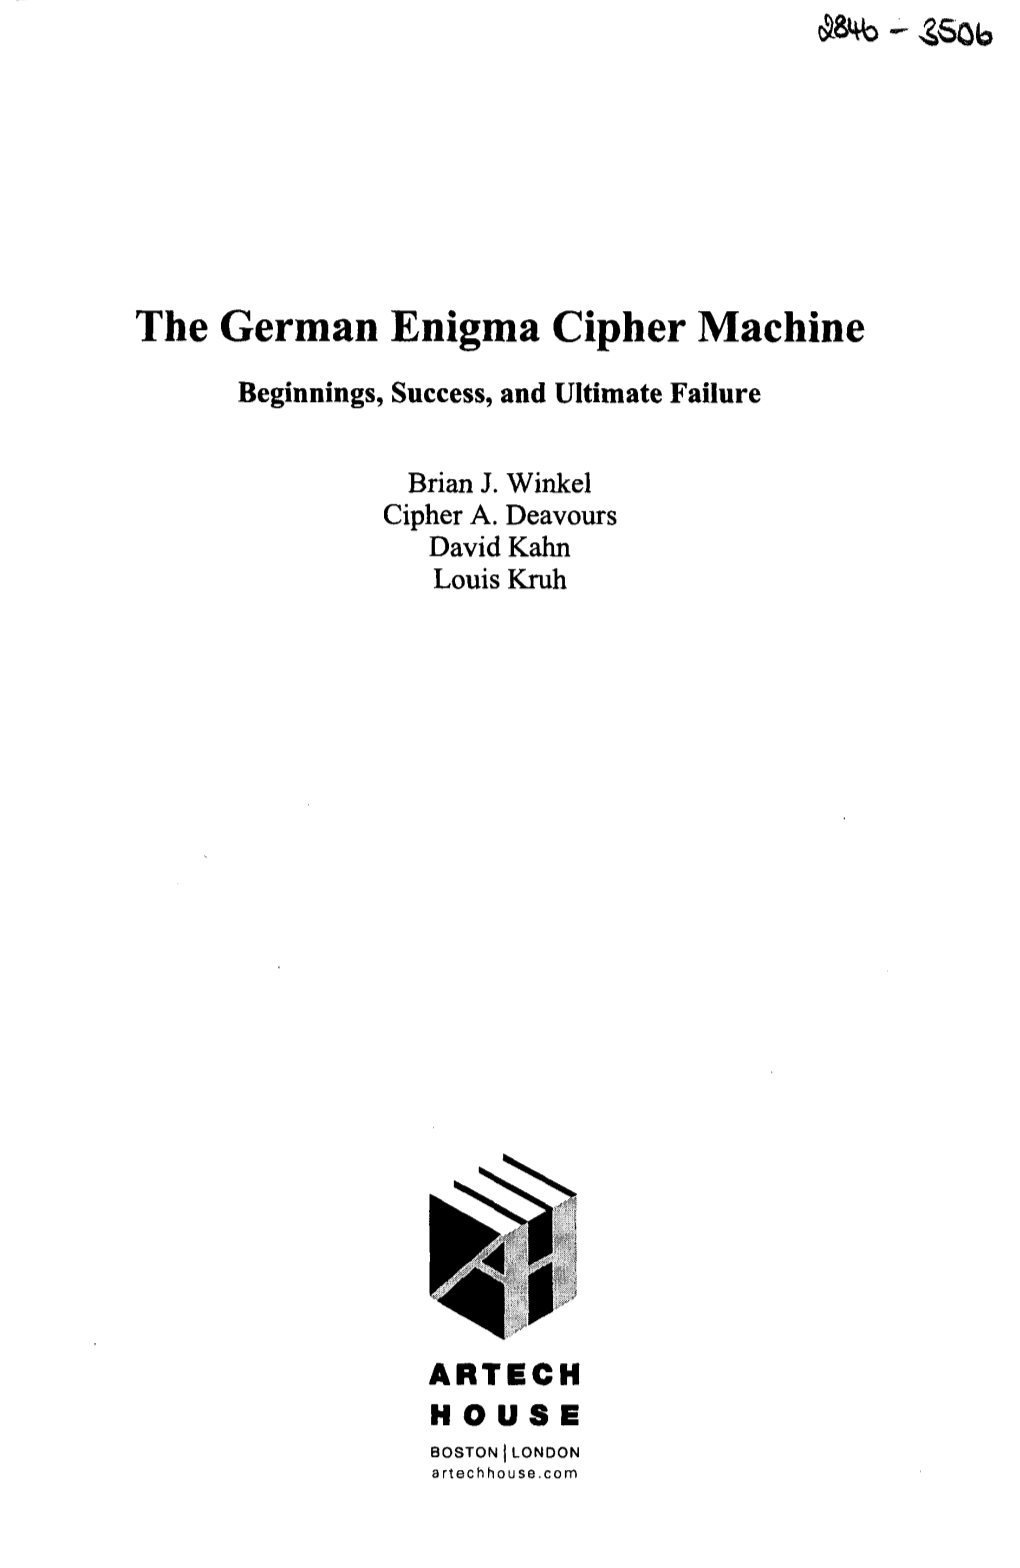 The German Enigma Cipher Machine Beginnings, Success, and Ultimate Failure